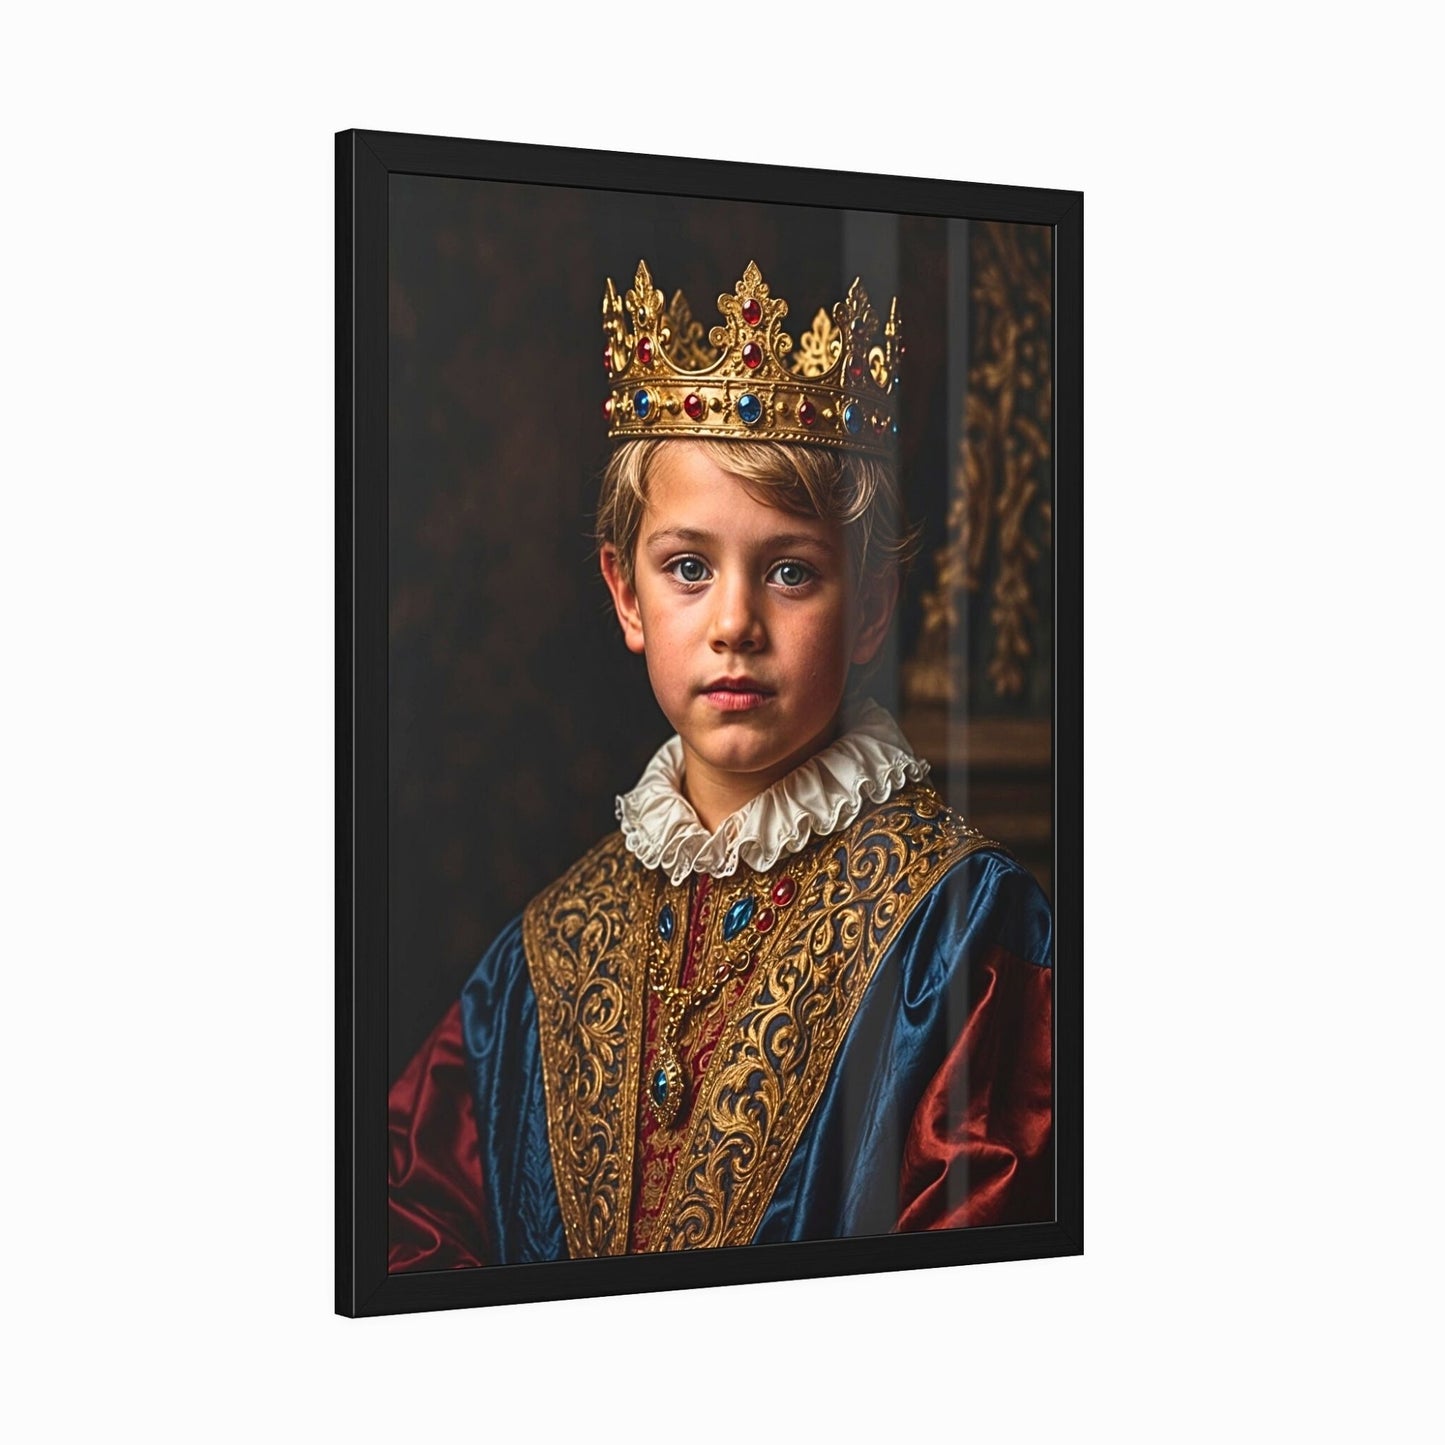 Transform your child's photo into a masterpiece with our Custom Kid Royal Portrait service. Personalized portraits of your little Prince or Princess, ideal for birthdays and memorable gifts. Experience the elegance of Renaissance-inspired artwork tailored from your photos, perfect for decorating children's rooms and celebrating special moments.